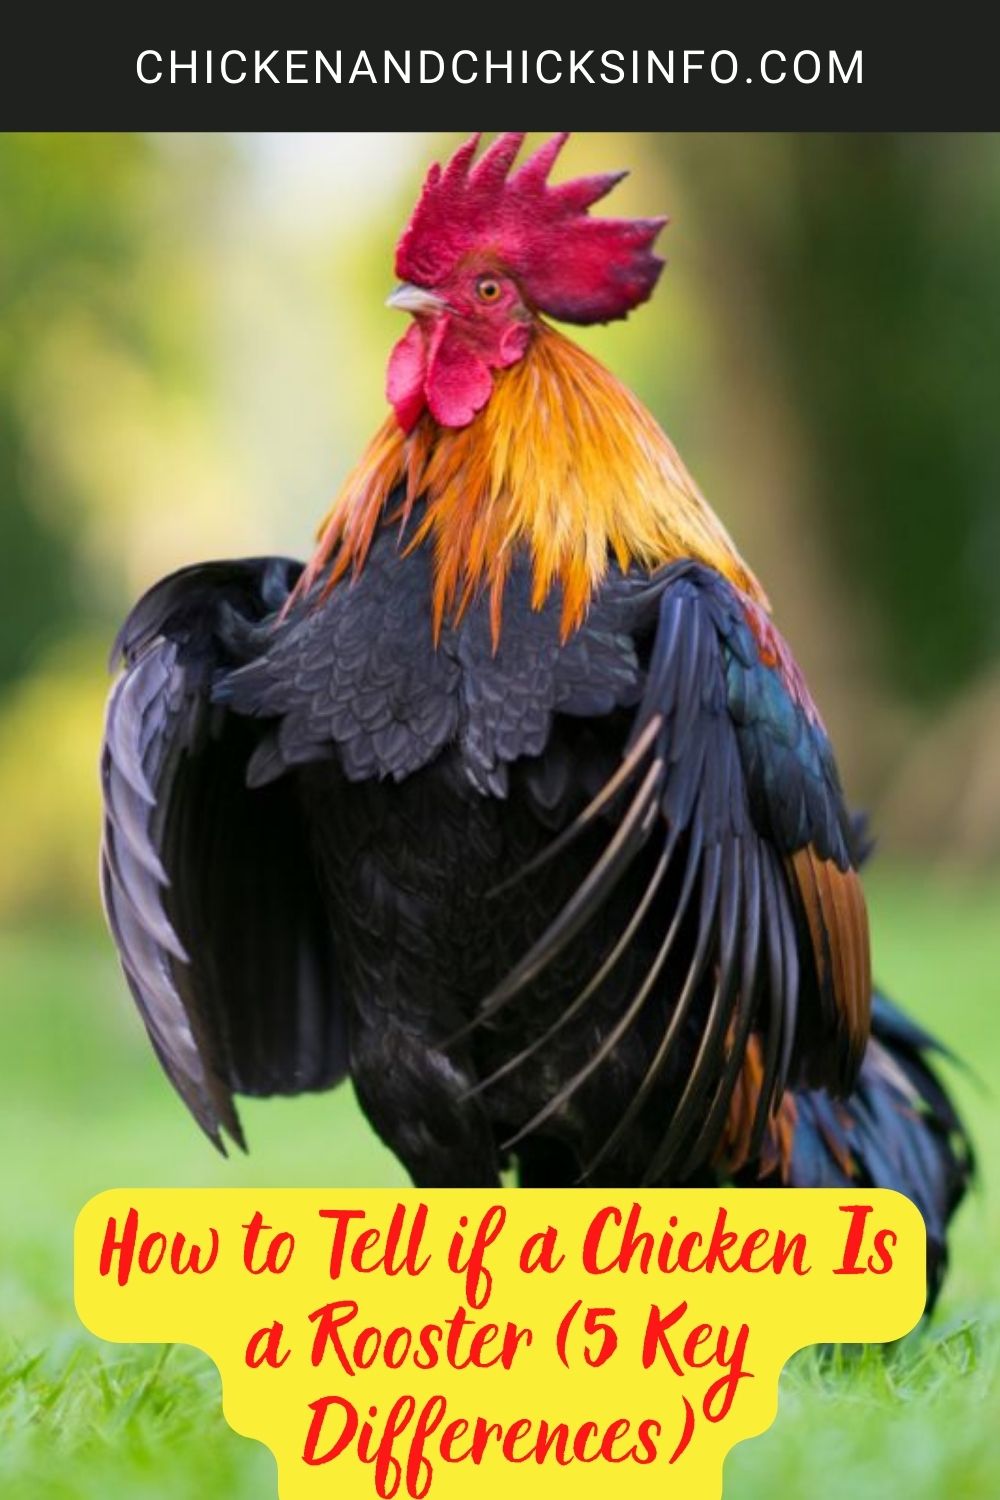 How to Tell if a Chicken Is a Rooster poster.